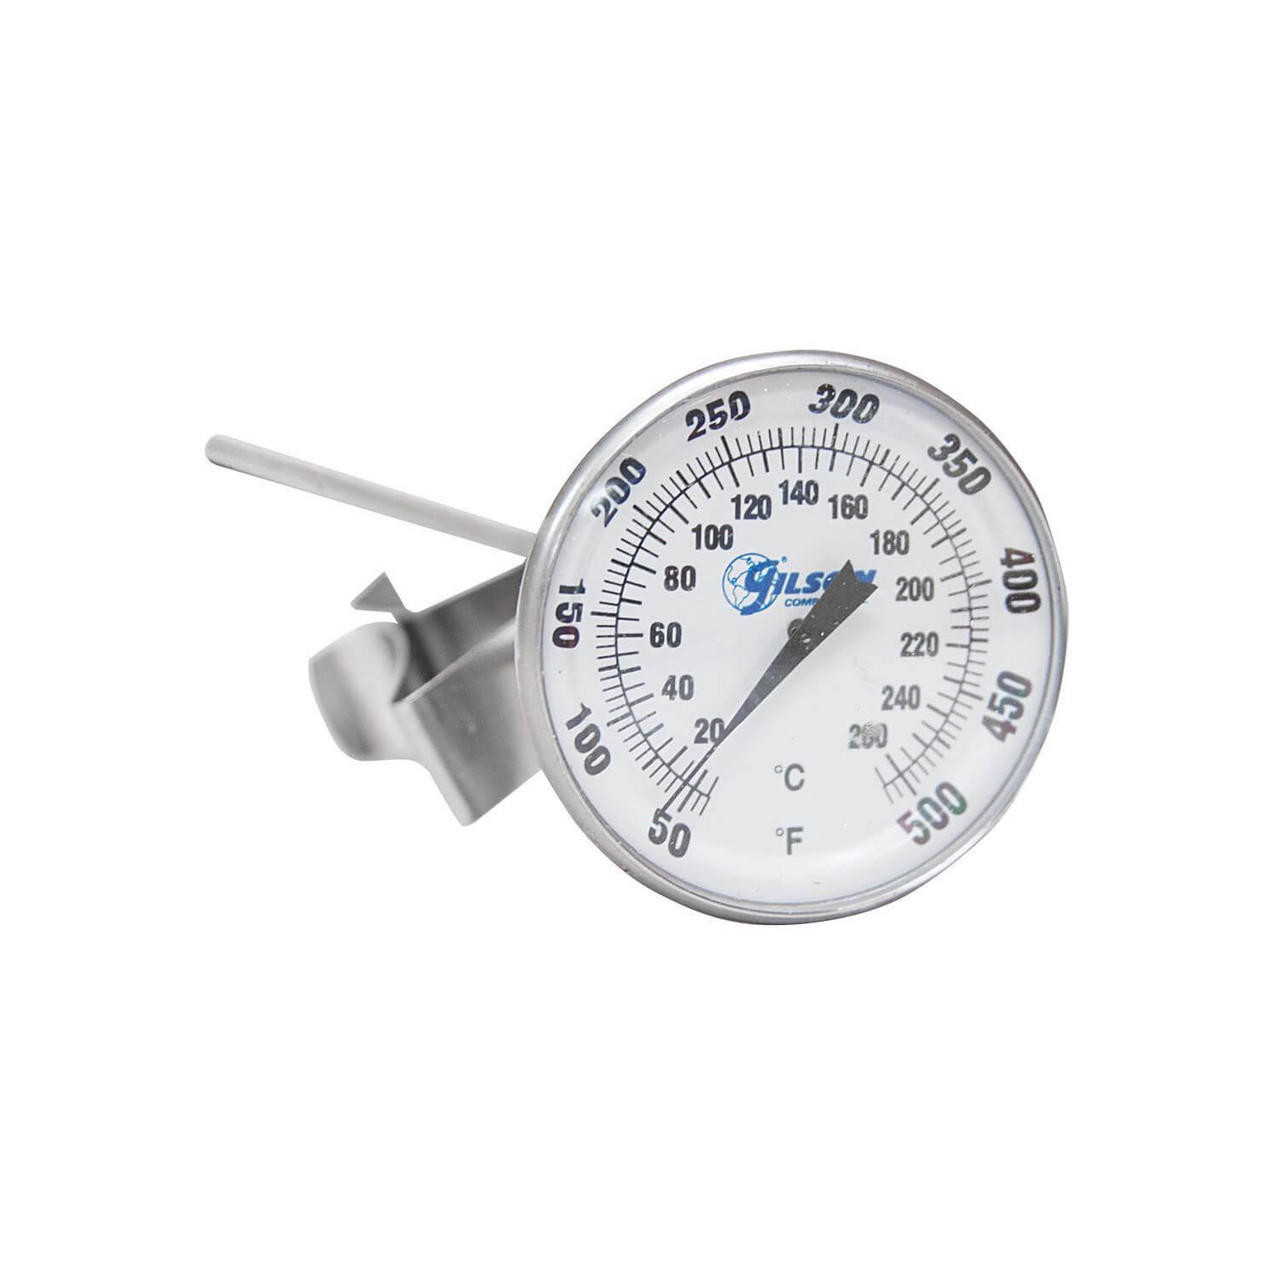 https://cdn11.bigcommerce.com/s-zgzol/images/stencil/1280x1280/products/7790/237488/gilson-company-asphaltconcrete-dual-dial-thermometer-50-to-550f-8in-stem-2in-dial__55514.1698295676.jpg?c=2